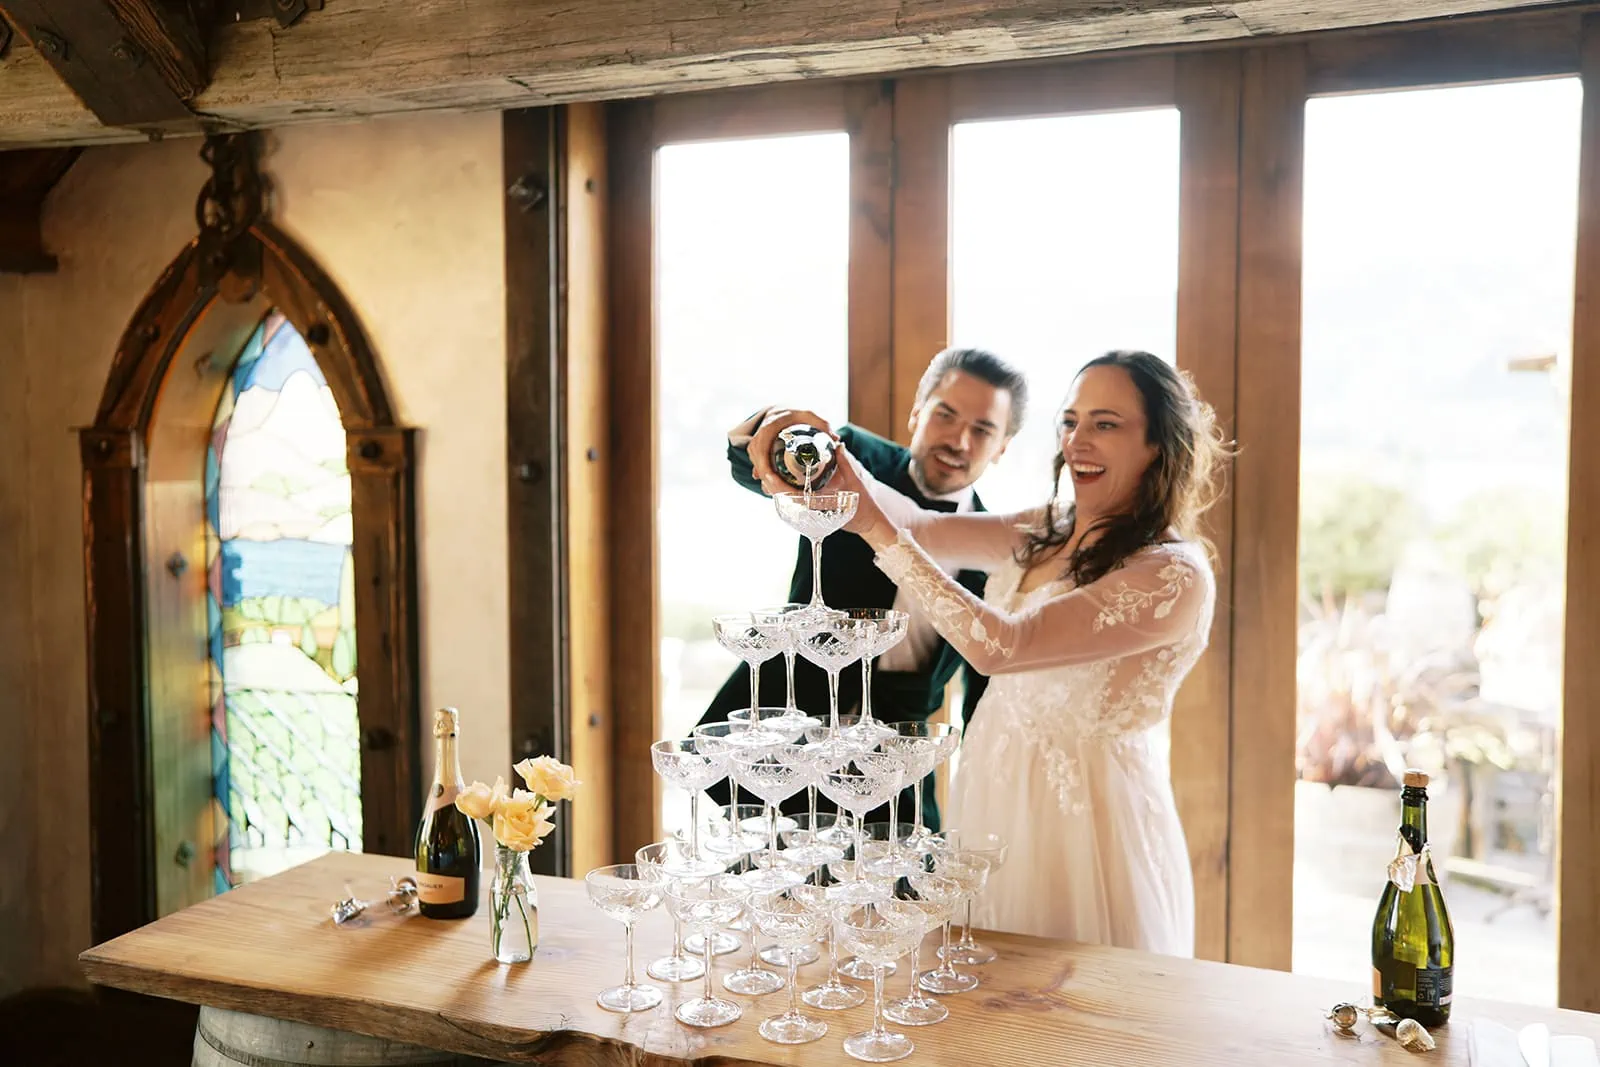 Queenstown Wedding Photographer Nat & Tim, a bride and groom, enjoying their Queenstown elopement at Deer Park Heights by pouring wine glasses at a table.